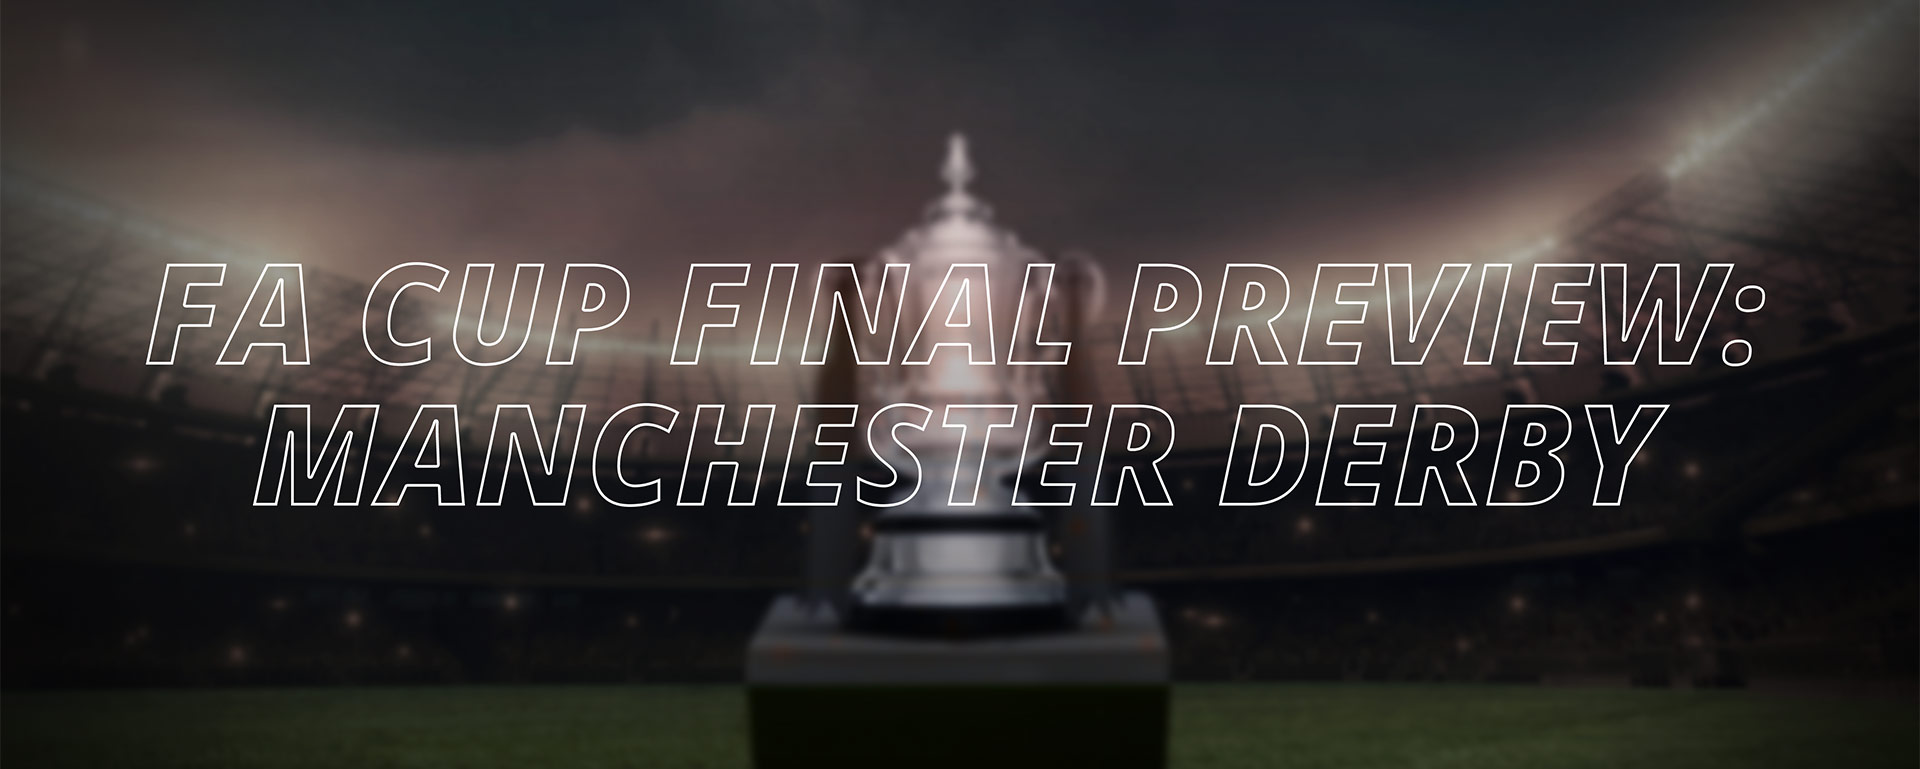 FA CUP FINAL PREVIEW: MANCHESTER DERBY